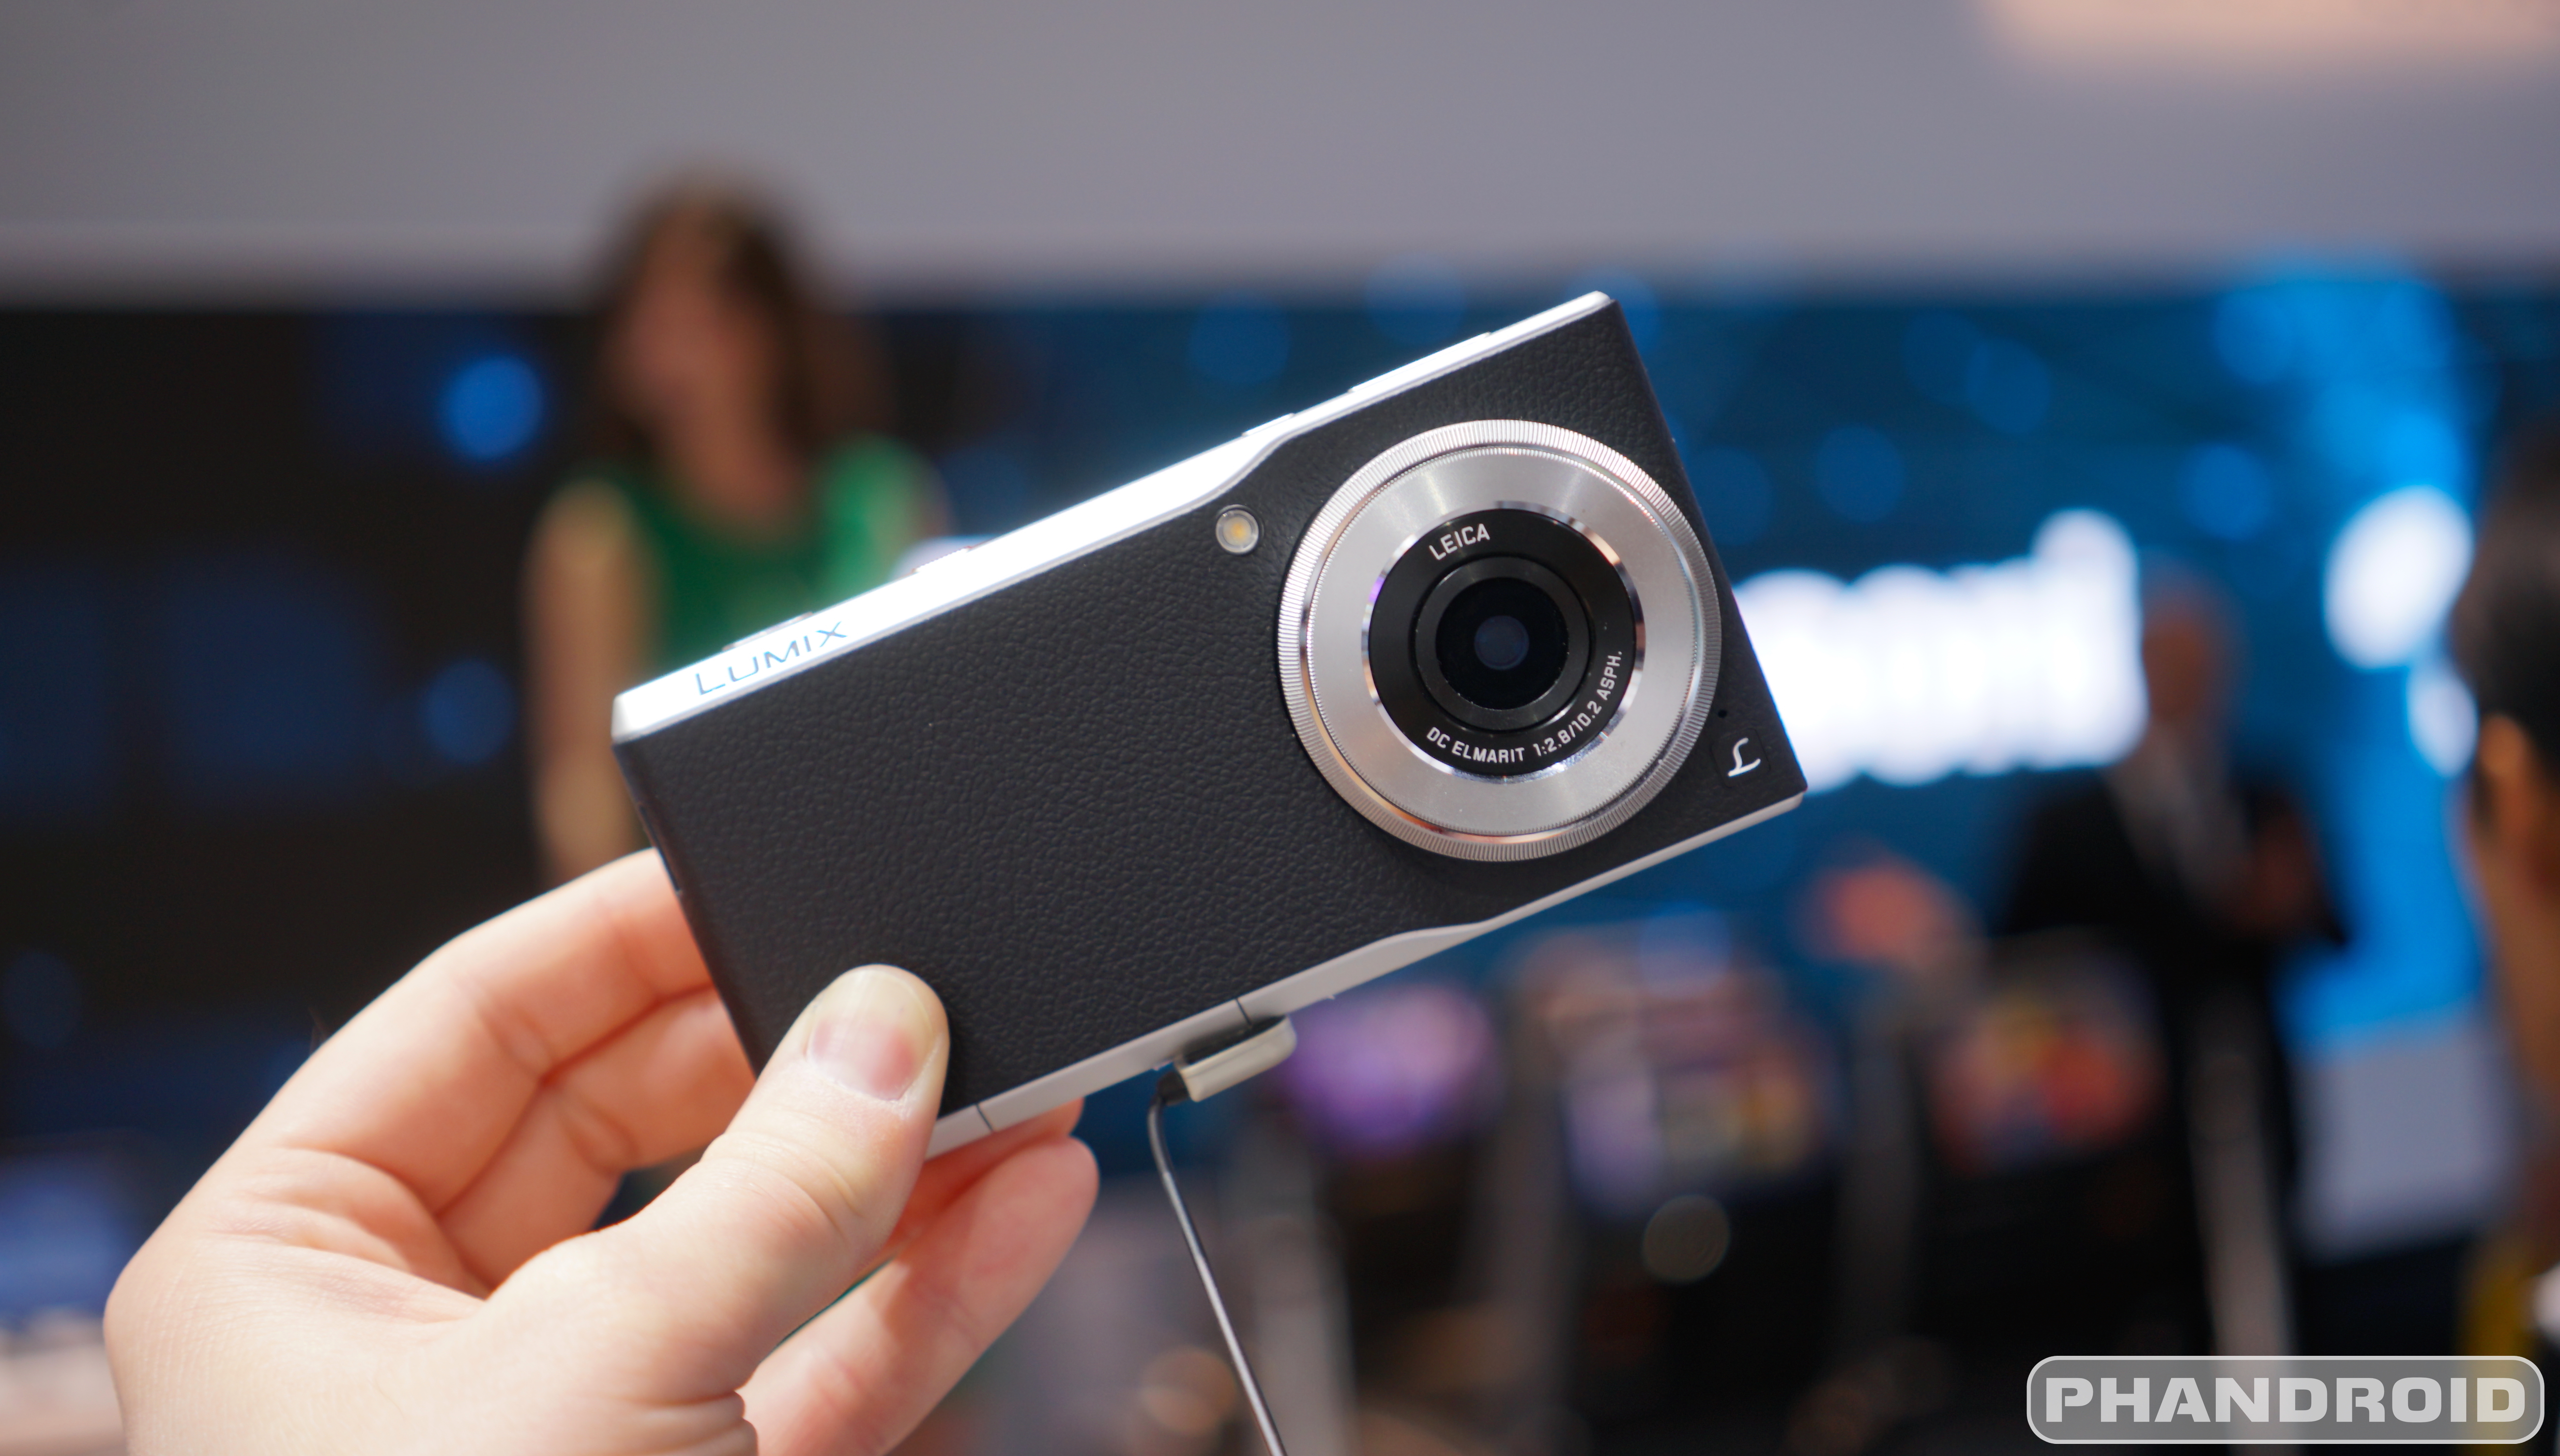 The Panasonic Lumix CM1 is what a camera phone should look like [VIDEO]